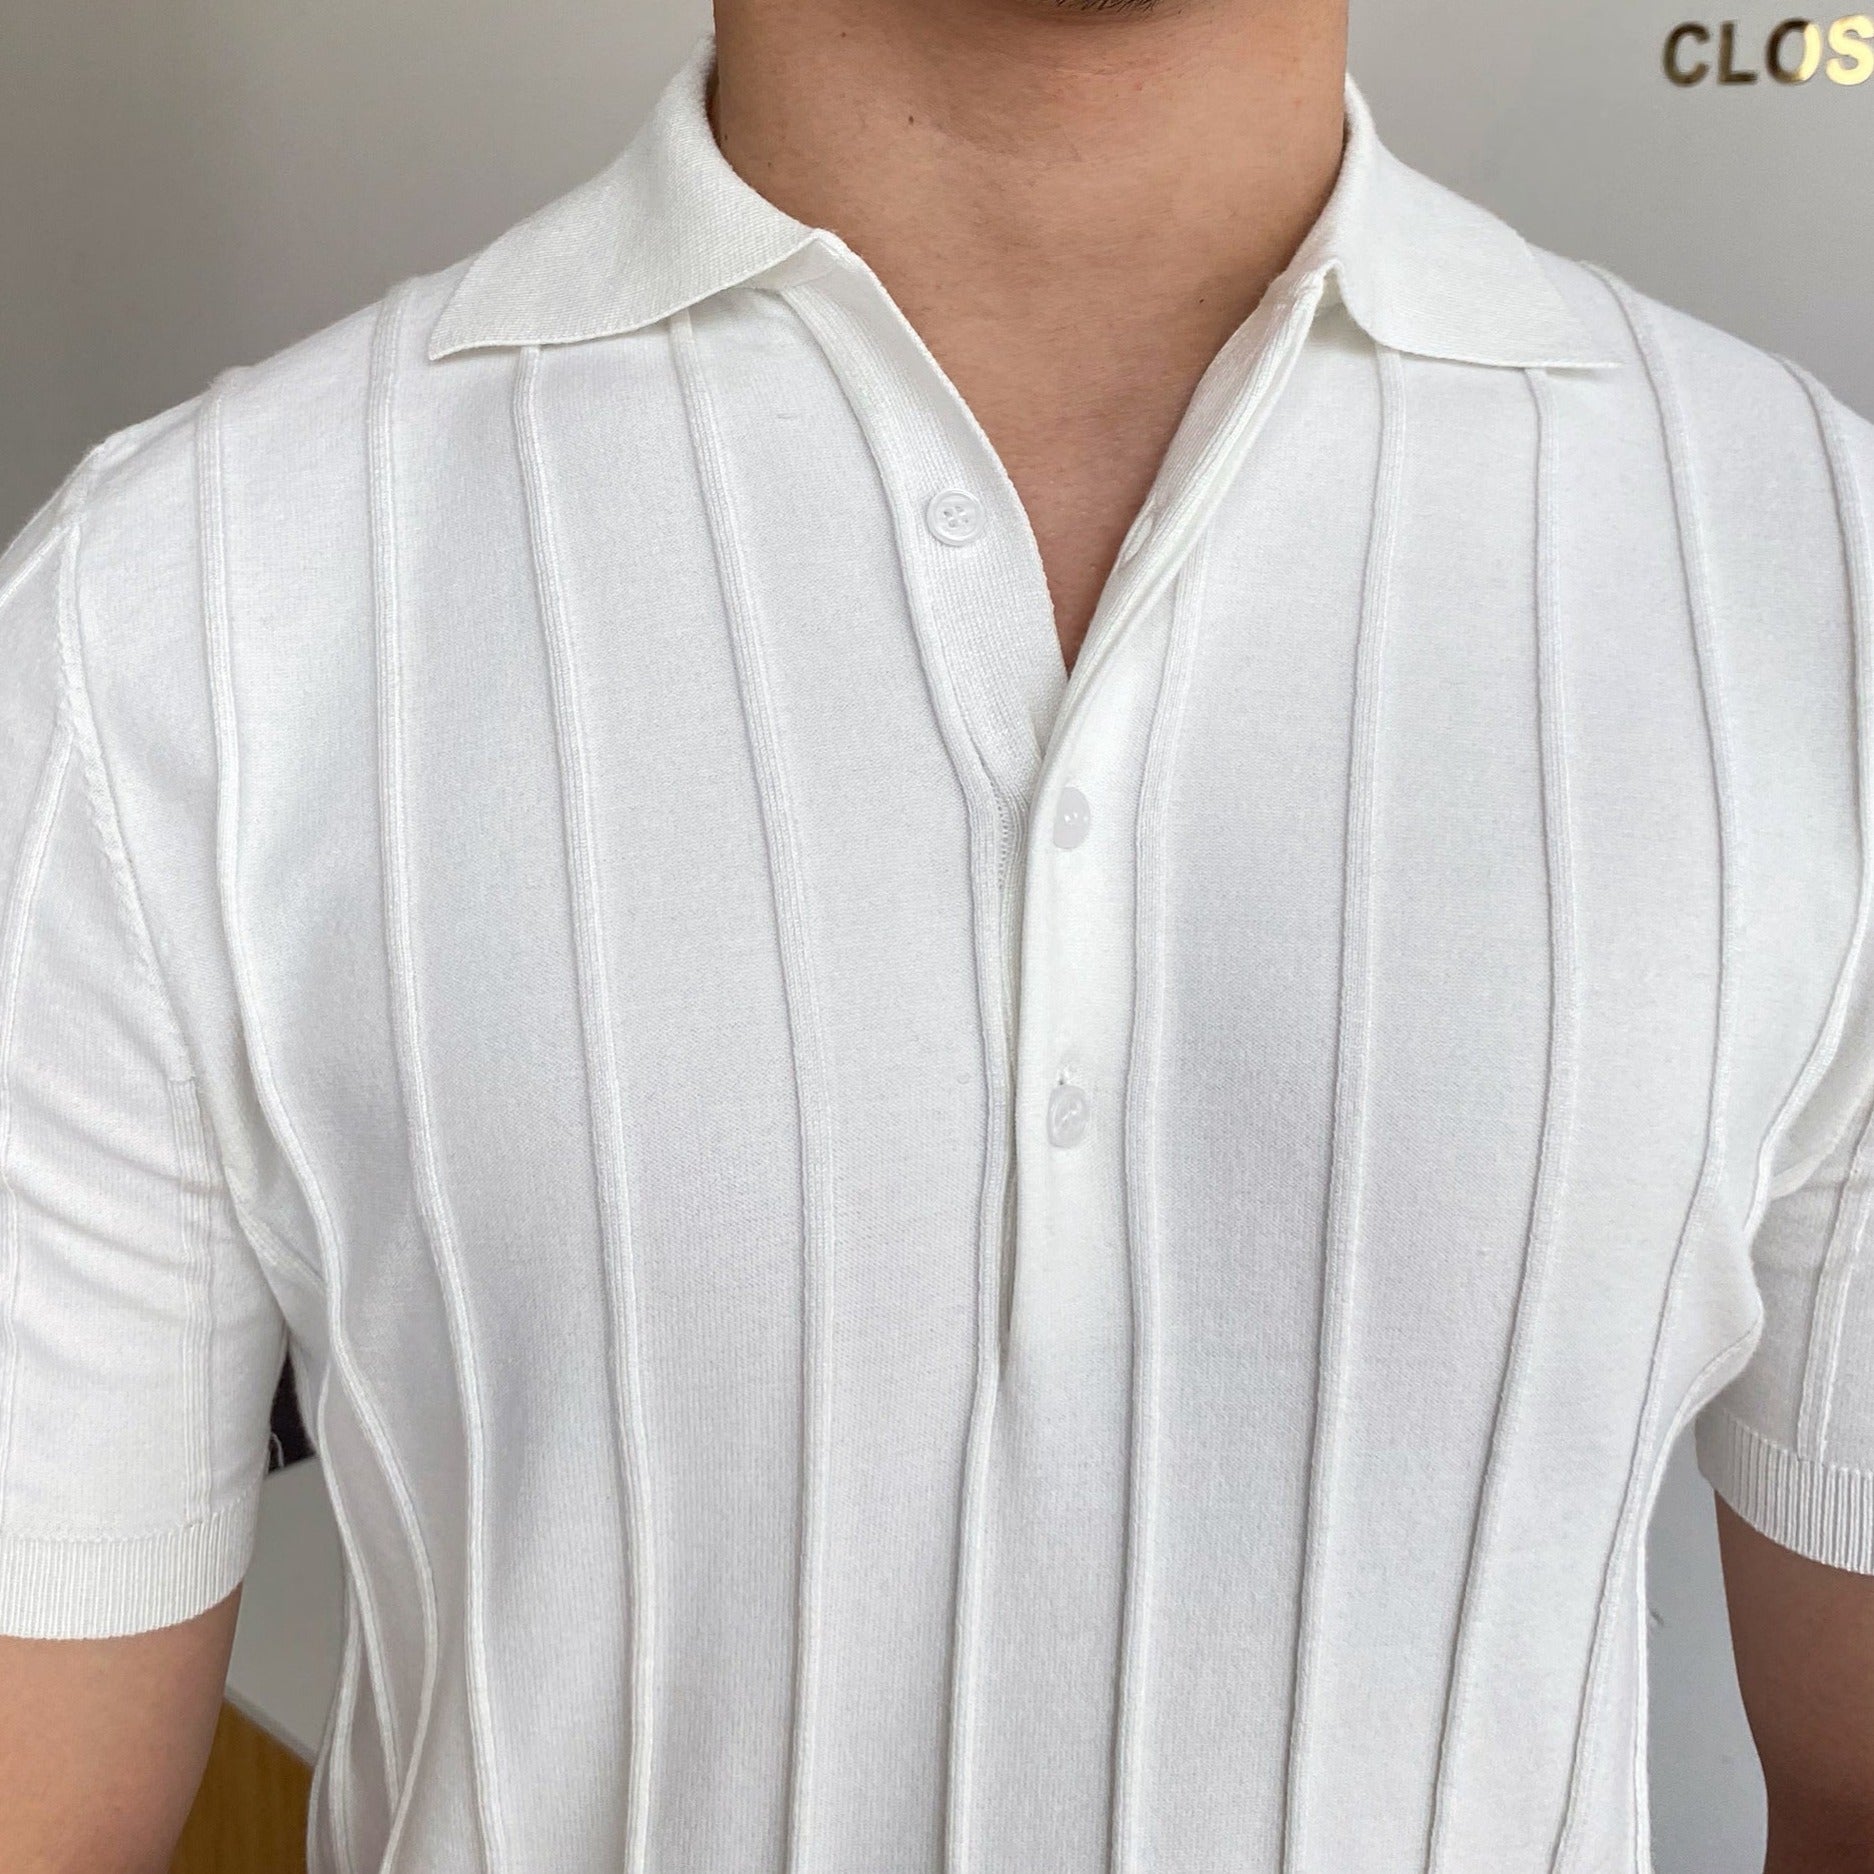 OLD MONEY Striped Polo Shirt - WEAR OLD MONEY